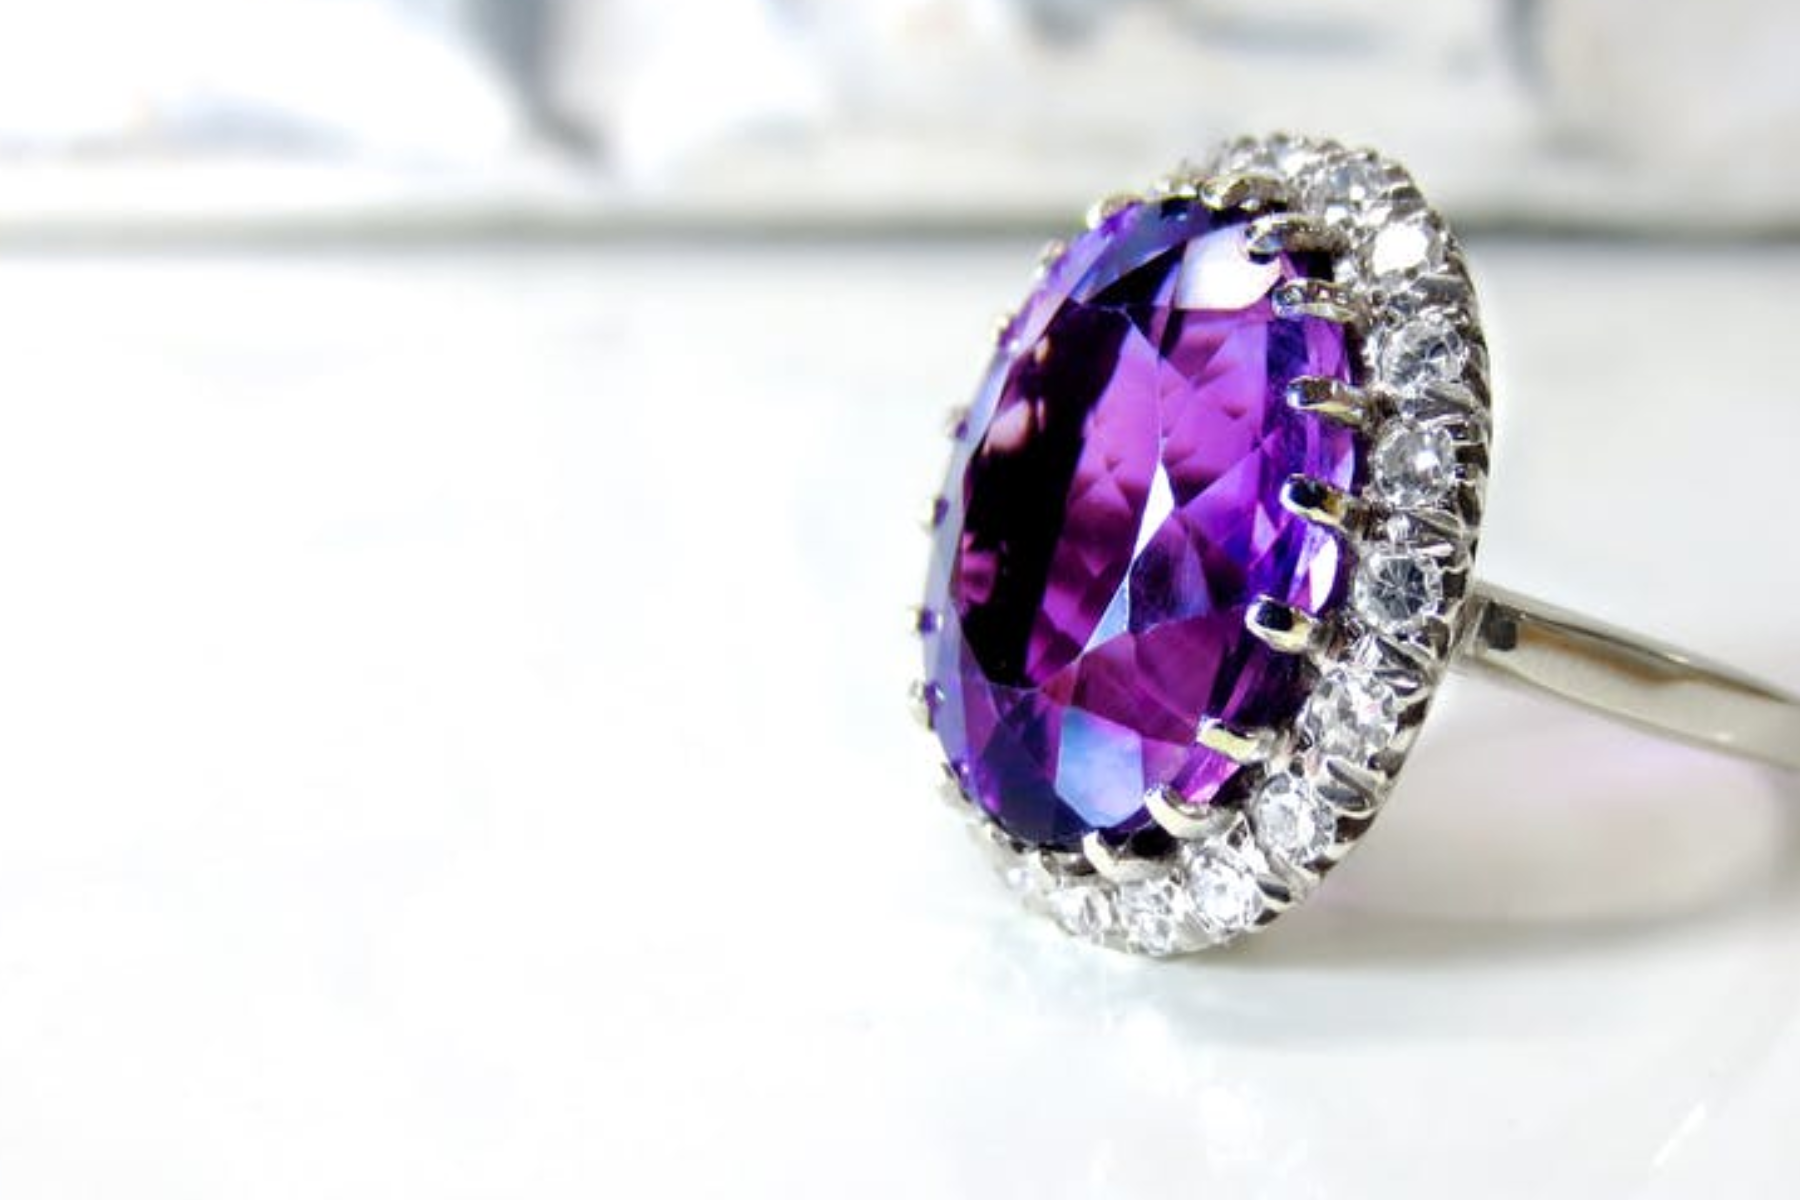 An engagement ring featuring a purple gemstone